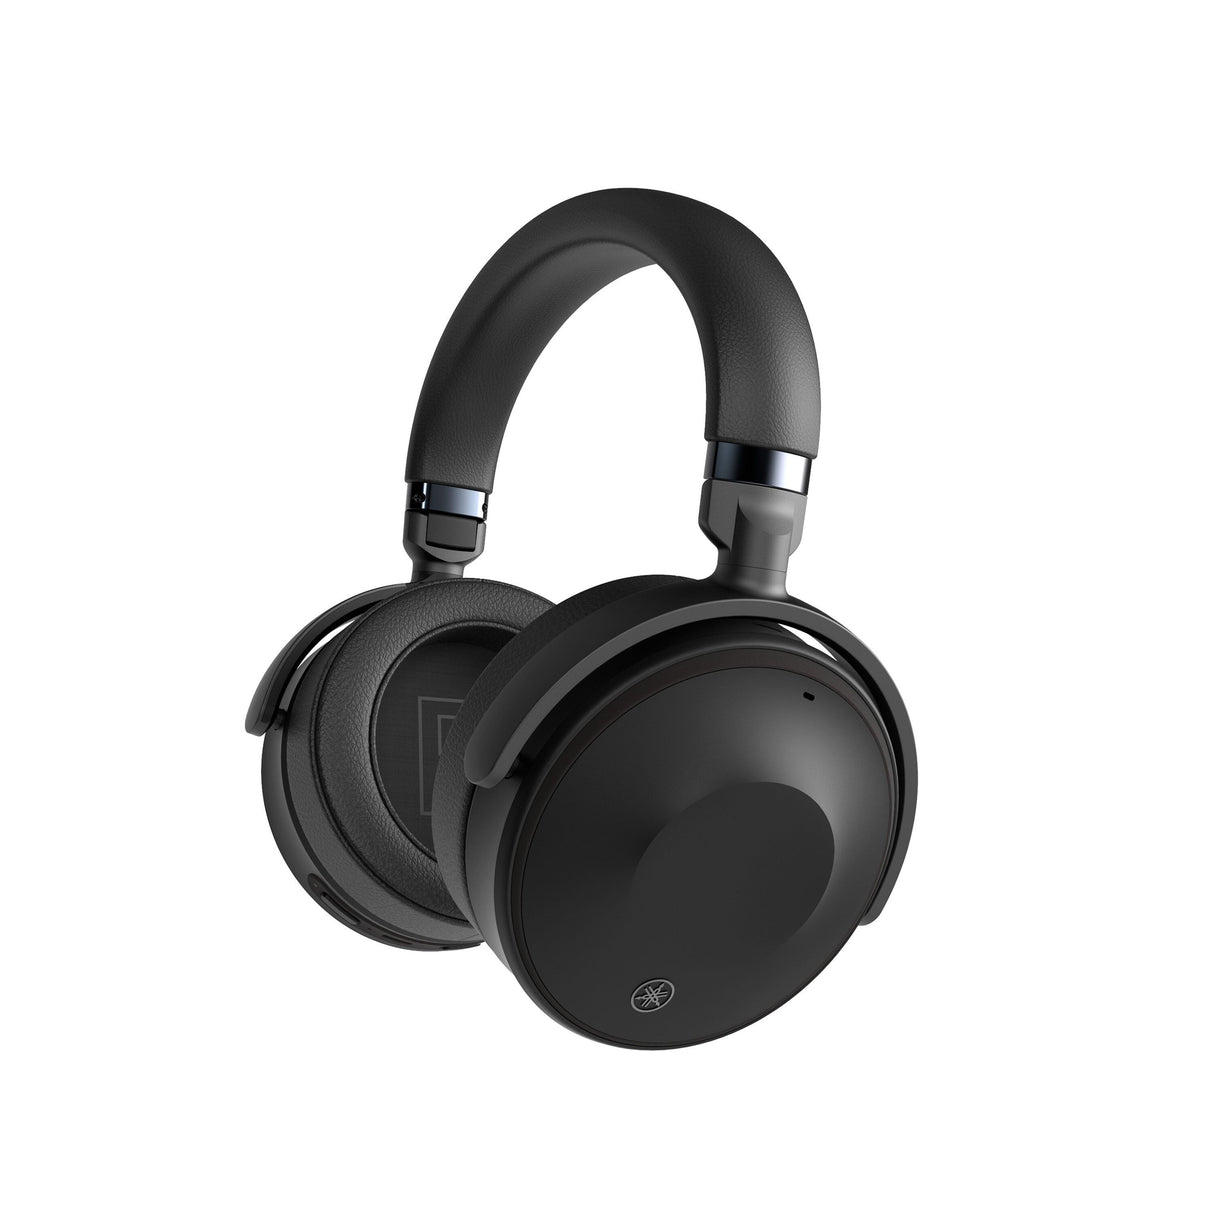 Yamaha YH-E700A Wireless Noise Cancellation Headphones with 3D Sound (Black)